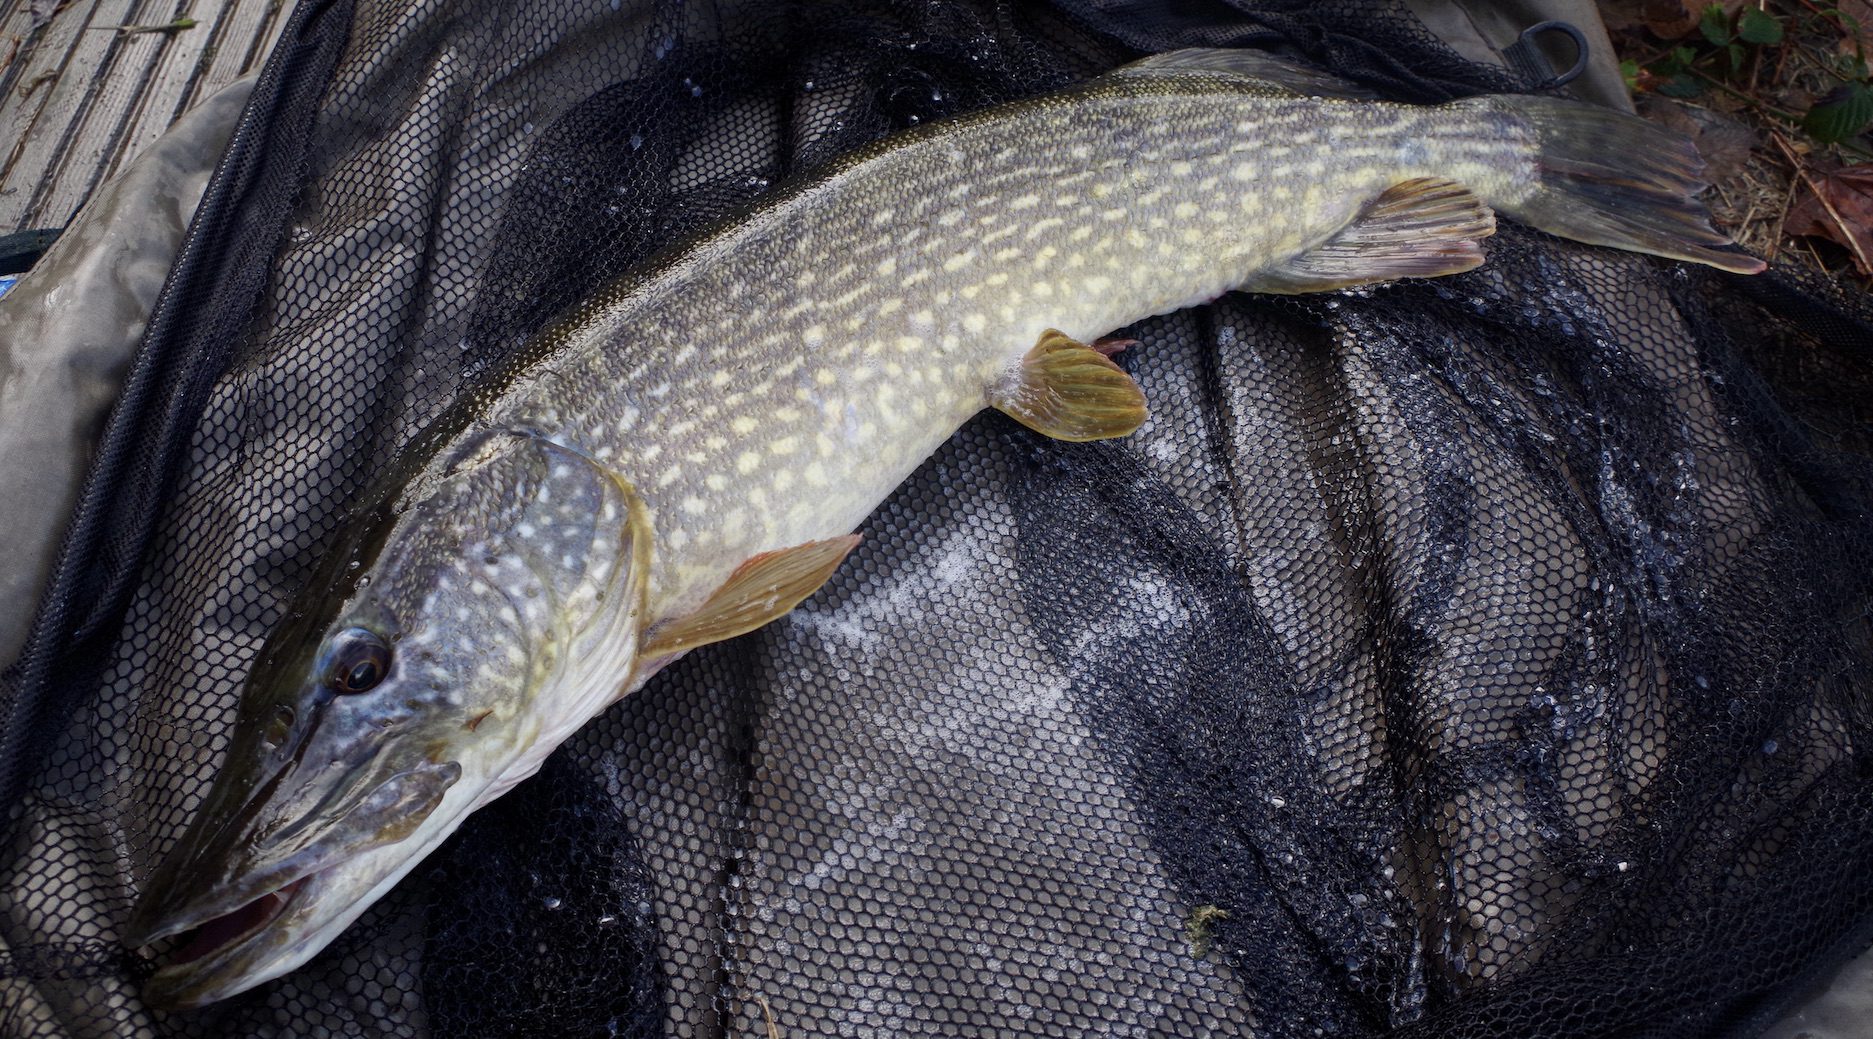 Updated pike rules at South West Lakes - North Devon & Exmoor Angling News  - The latest up to date information